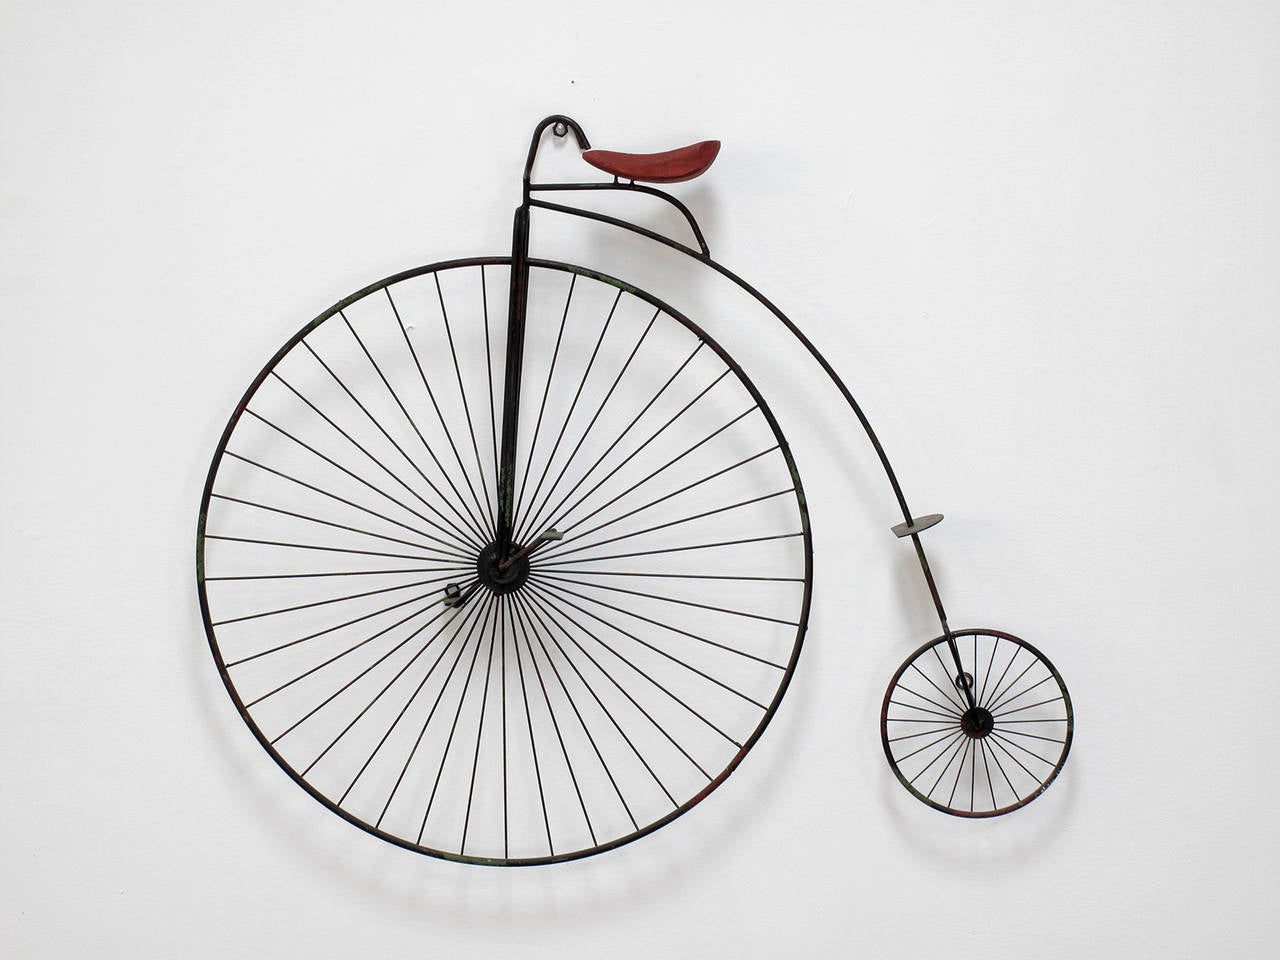 Wall-mounted sculpture in the shape of a high wheel bicycle in hand fashioned metal, paint and wood designed and made by Curtis Jere, signed and dated.